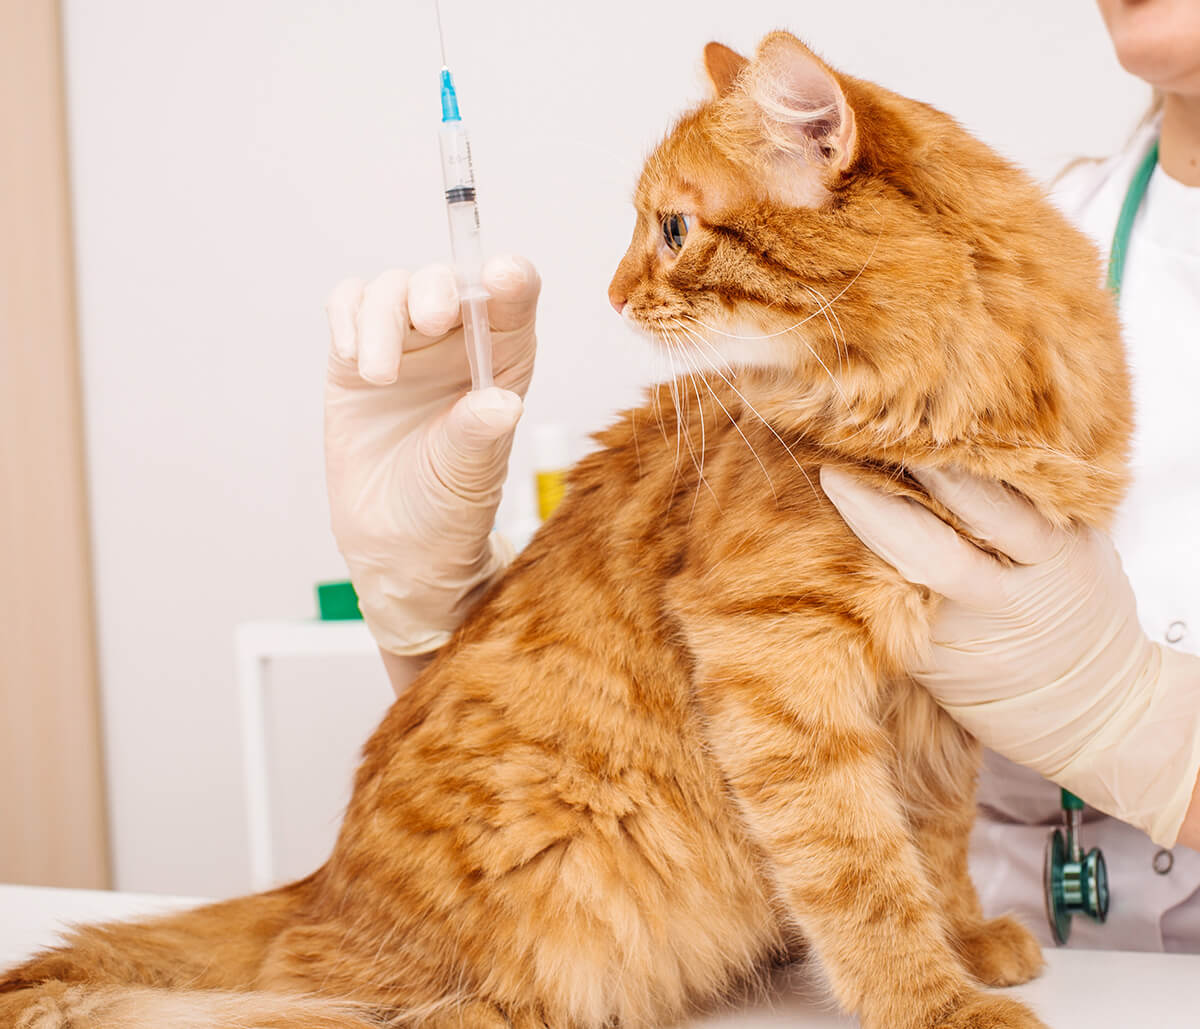 New AAHA and AAFP Feline Vaccination Guidelines in Jacksonville, FL Area, Focus on Your Cat’s Unique Lifestyle